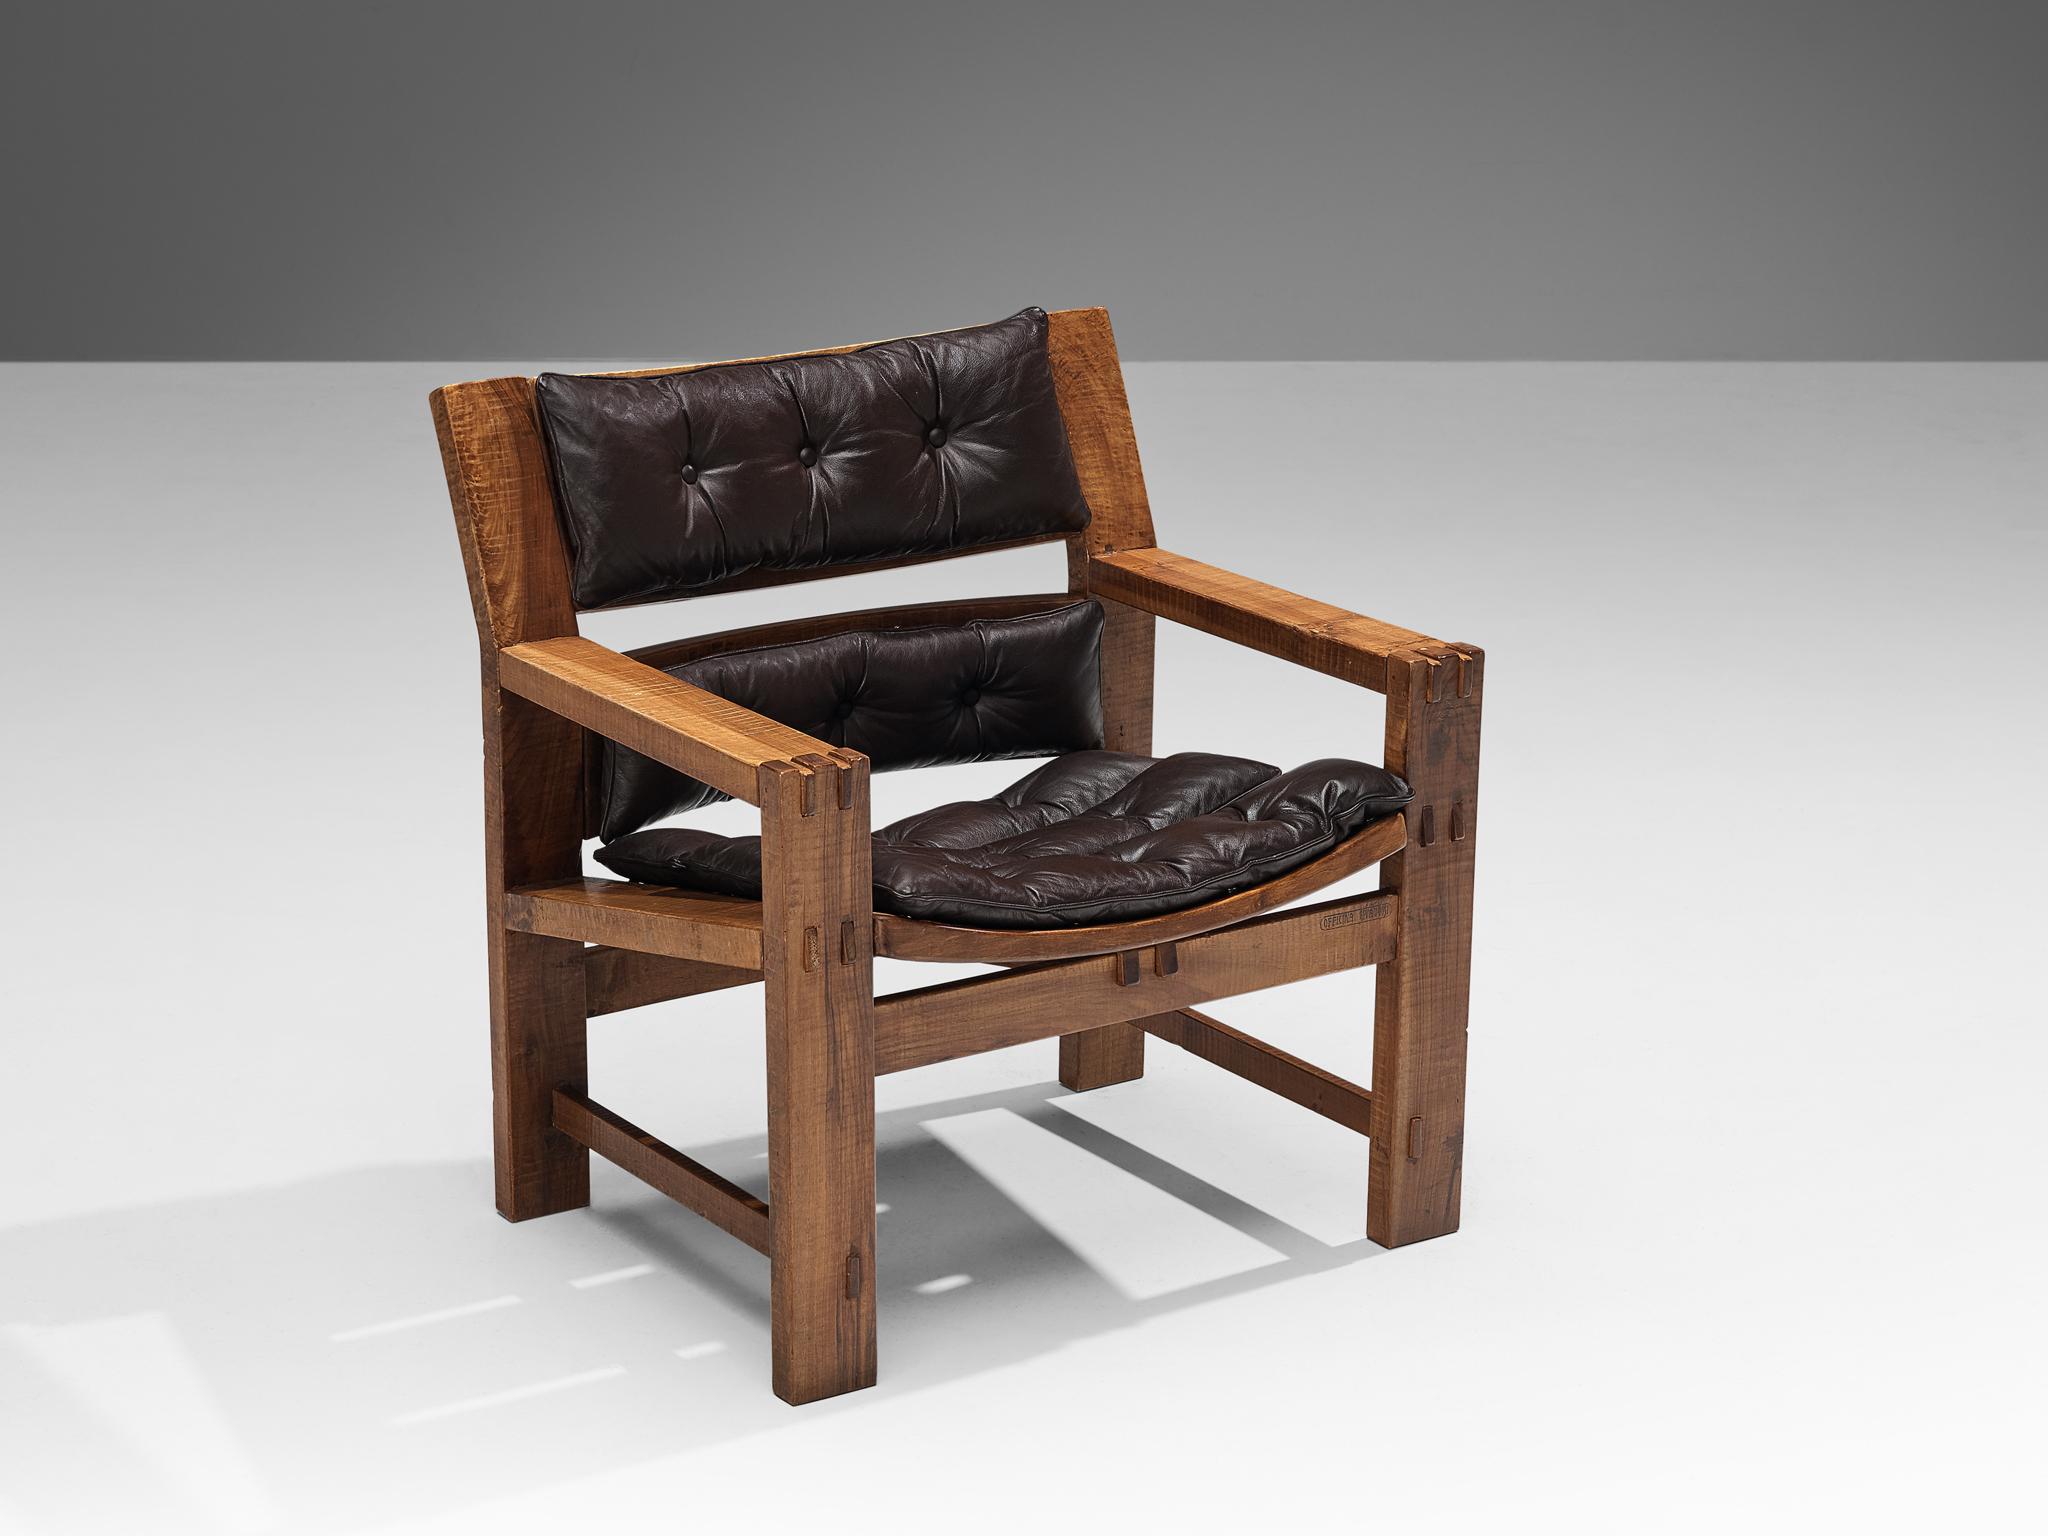 Late 20th Century Giuseppe Rivadossi for Officina Rivadossi Pair of Lounge Chairs in Walnut